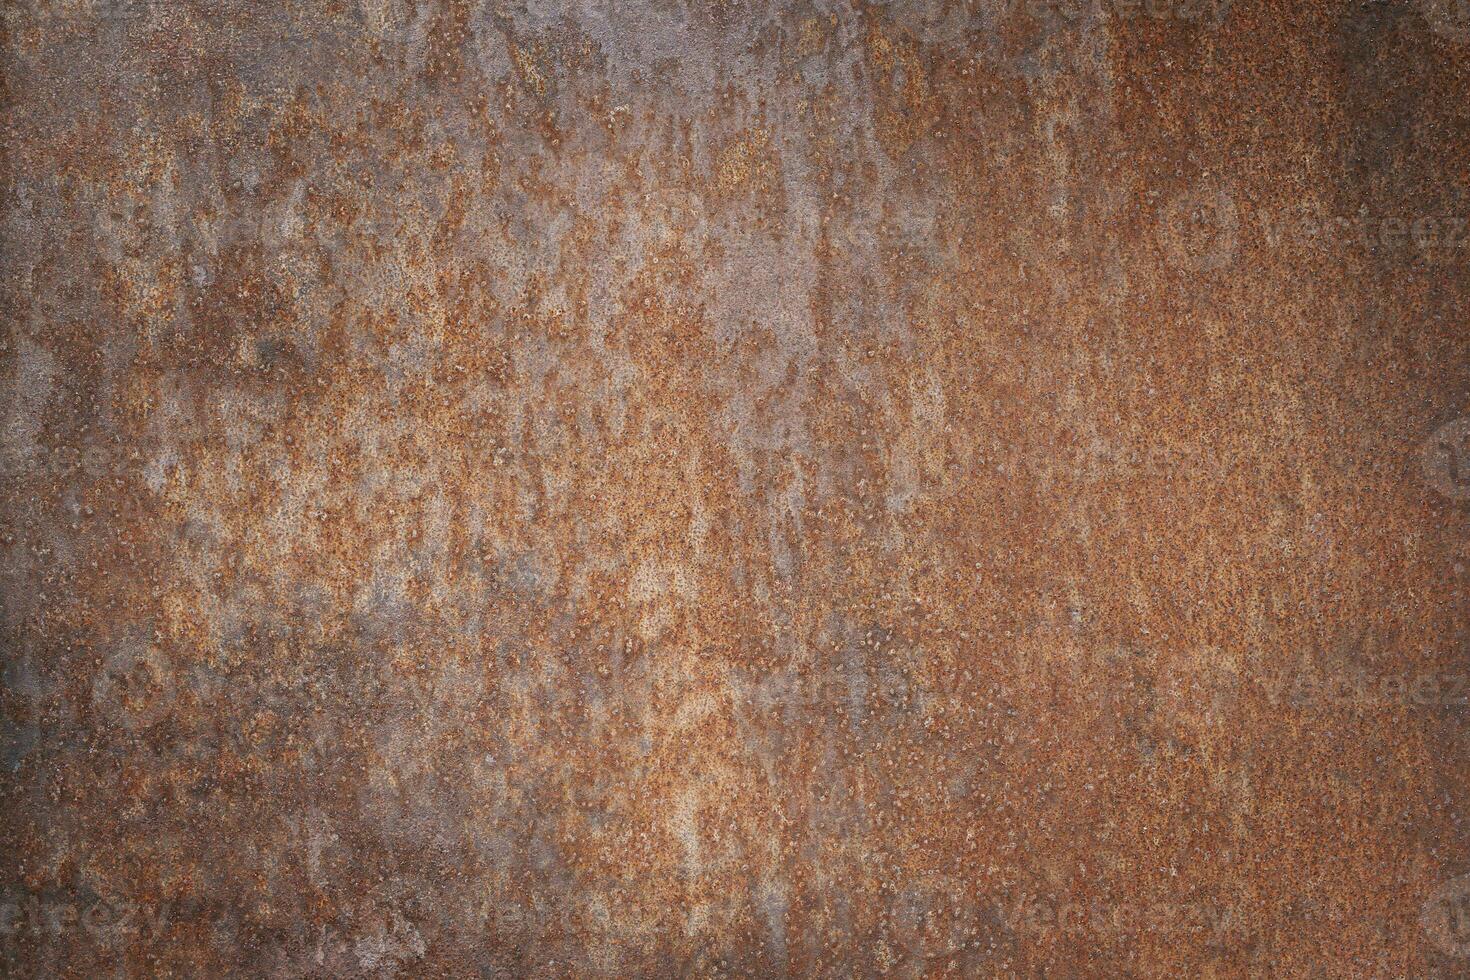 Aged rusty metal texture brown background photo